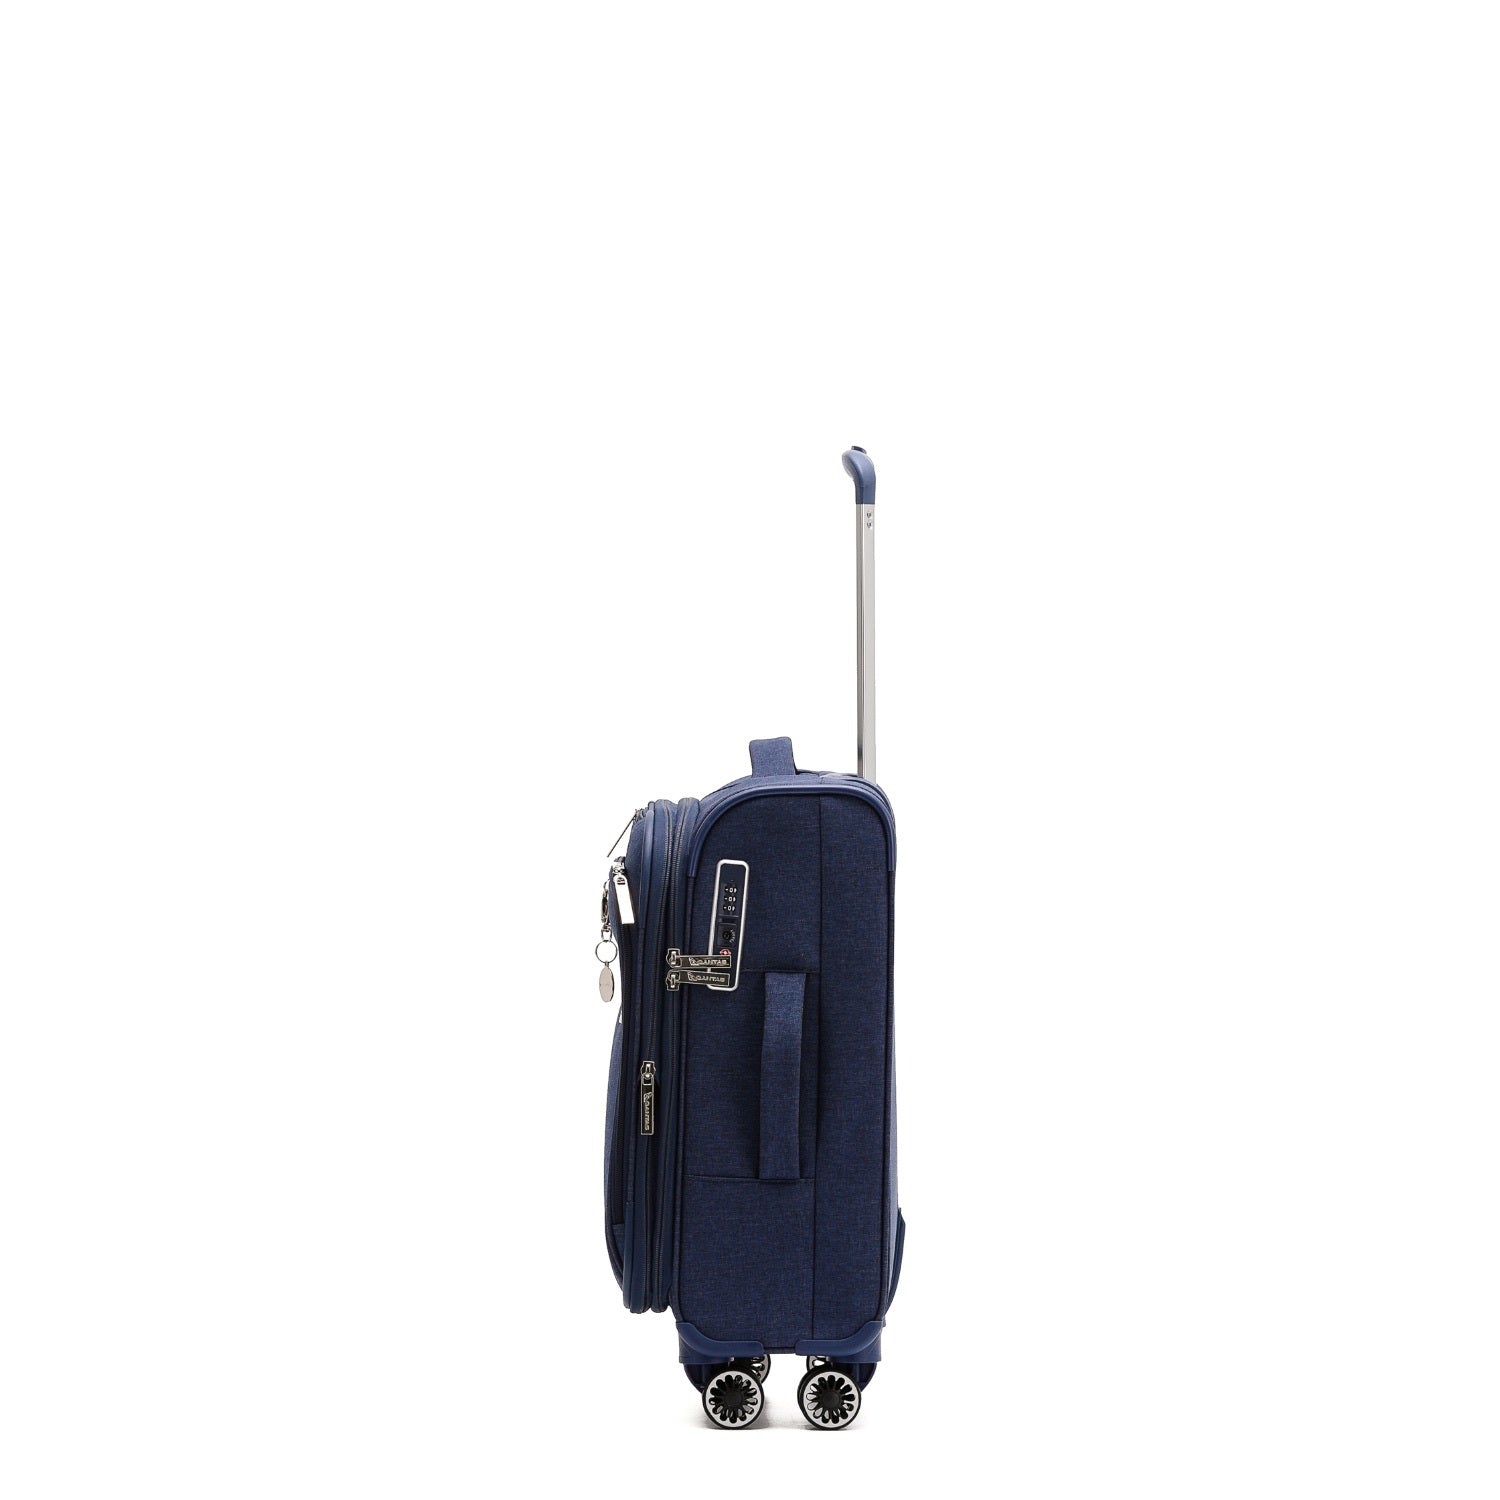 Qantas - QF400 55cm Small Adelaide Soft sided spinner - Navy - 0